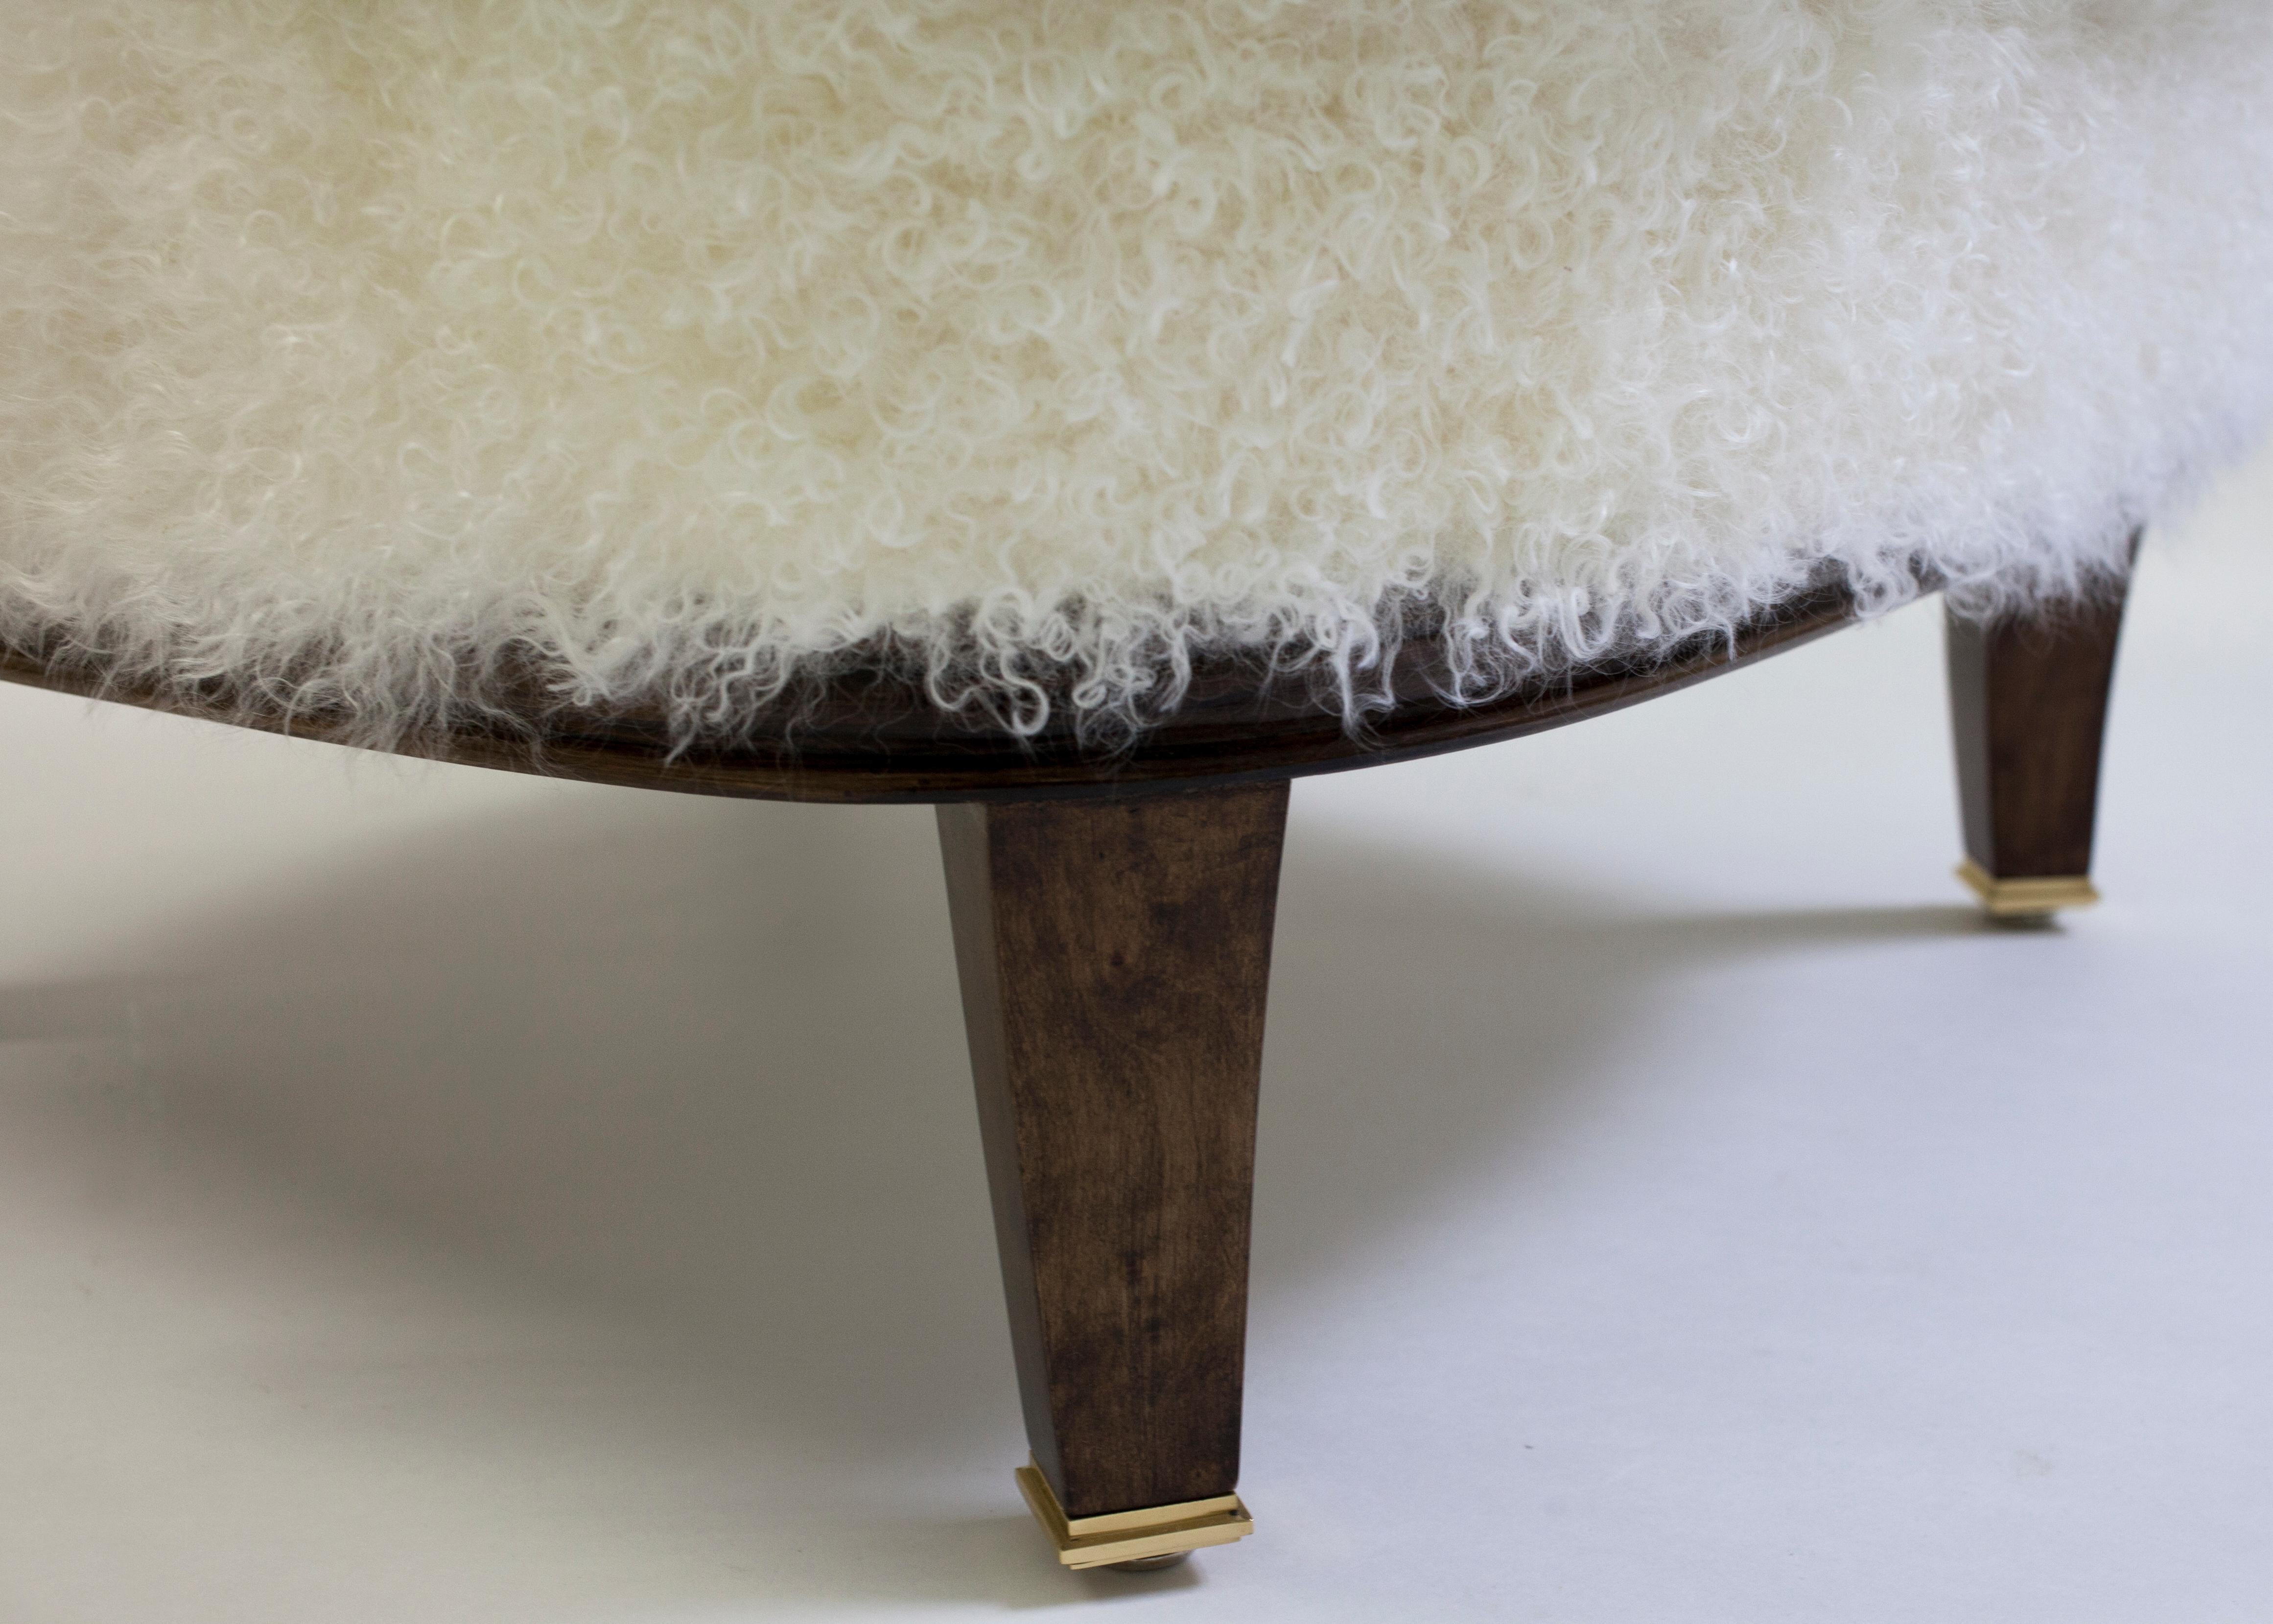 American Shearling Covered Shaped Back Chair with Wood Base and Legs with Metal Cap Feet  For Sale